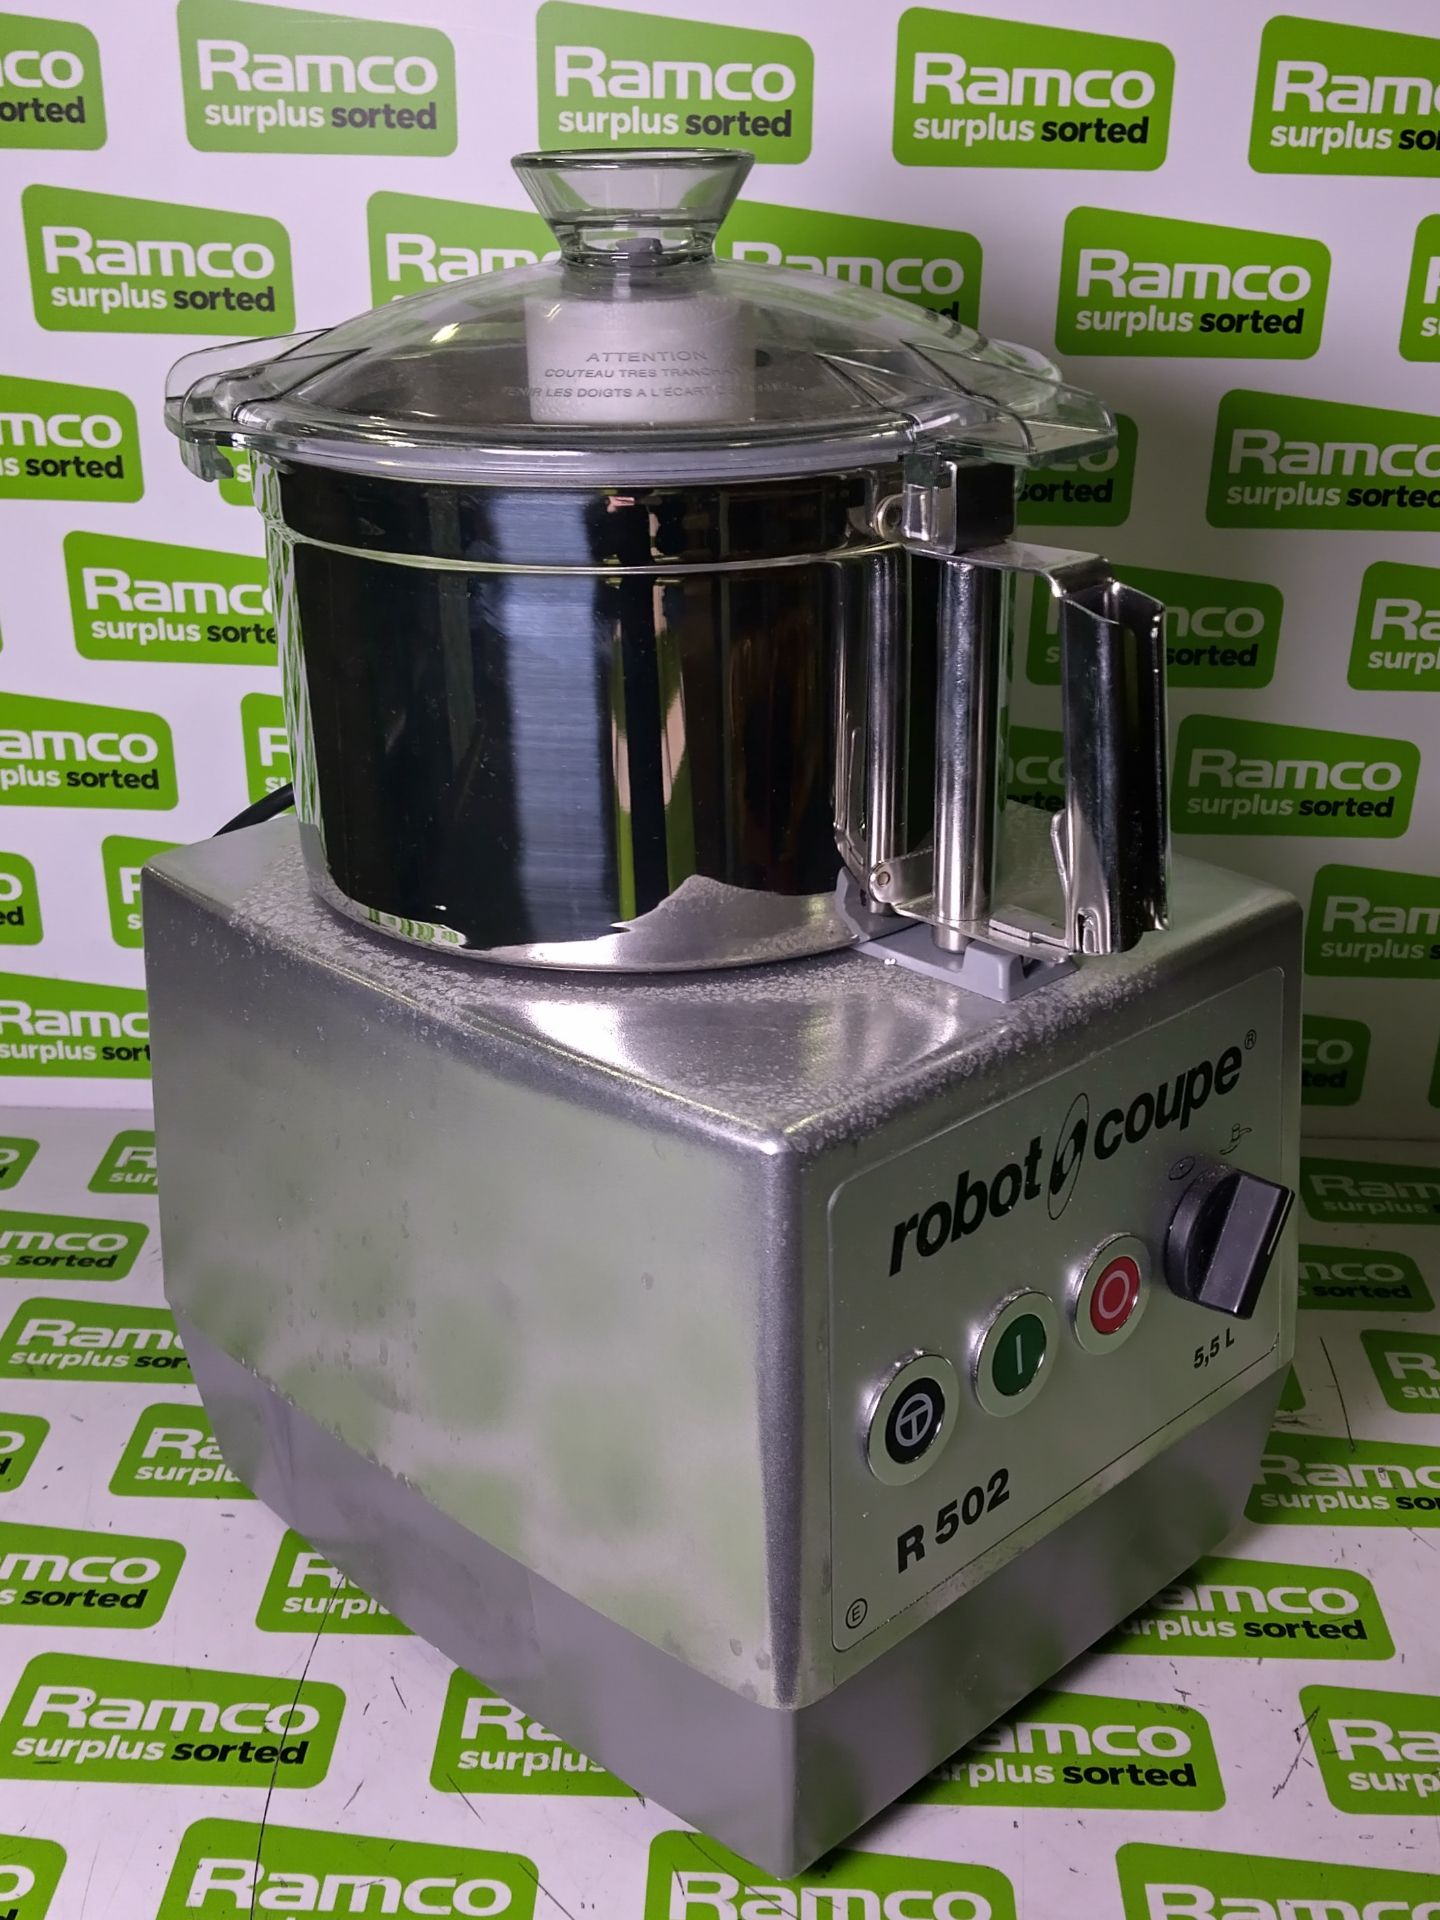 Robot-Coupe R 502 - food processor with stainless steel cutter bowl and slicing attachment - 440V - Image 4 of 6